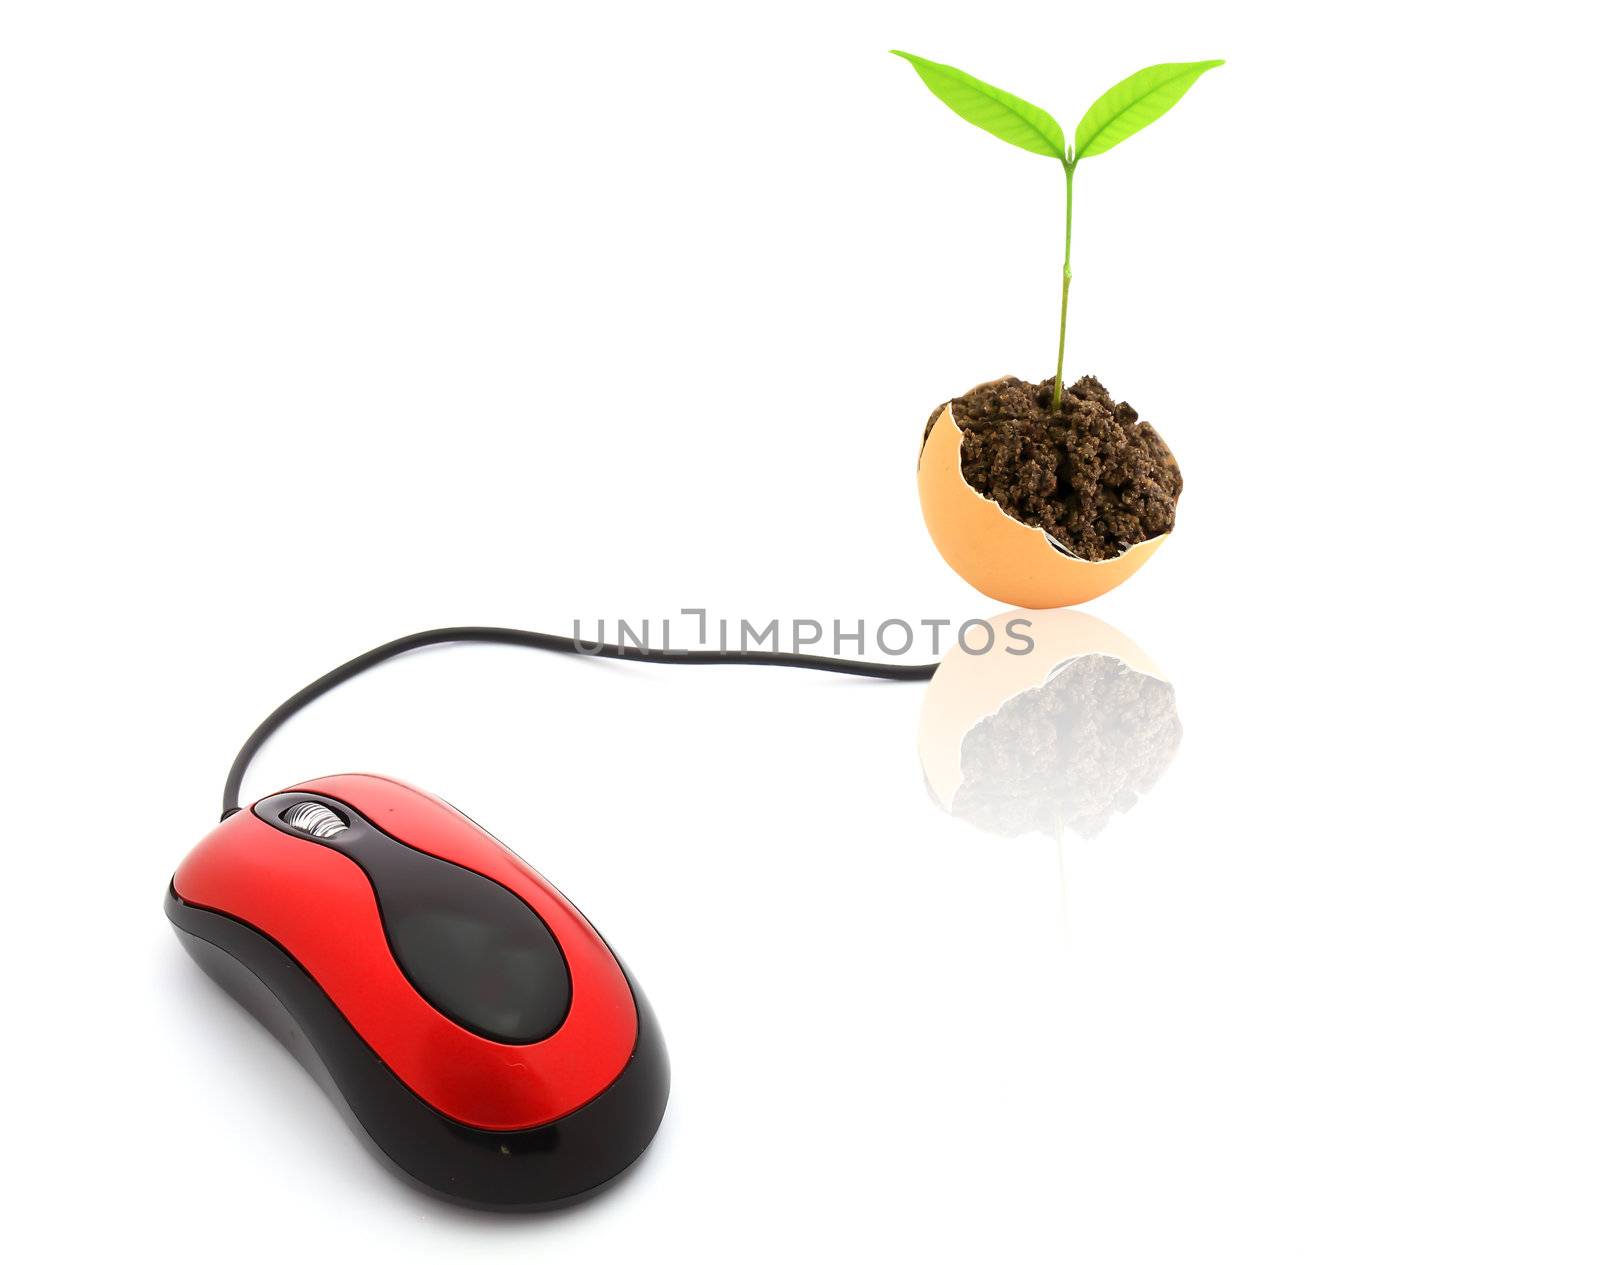 Pc mouse isolated on white with clipping path